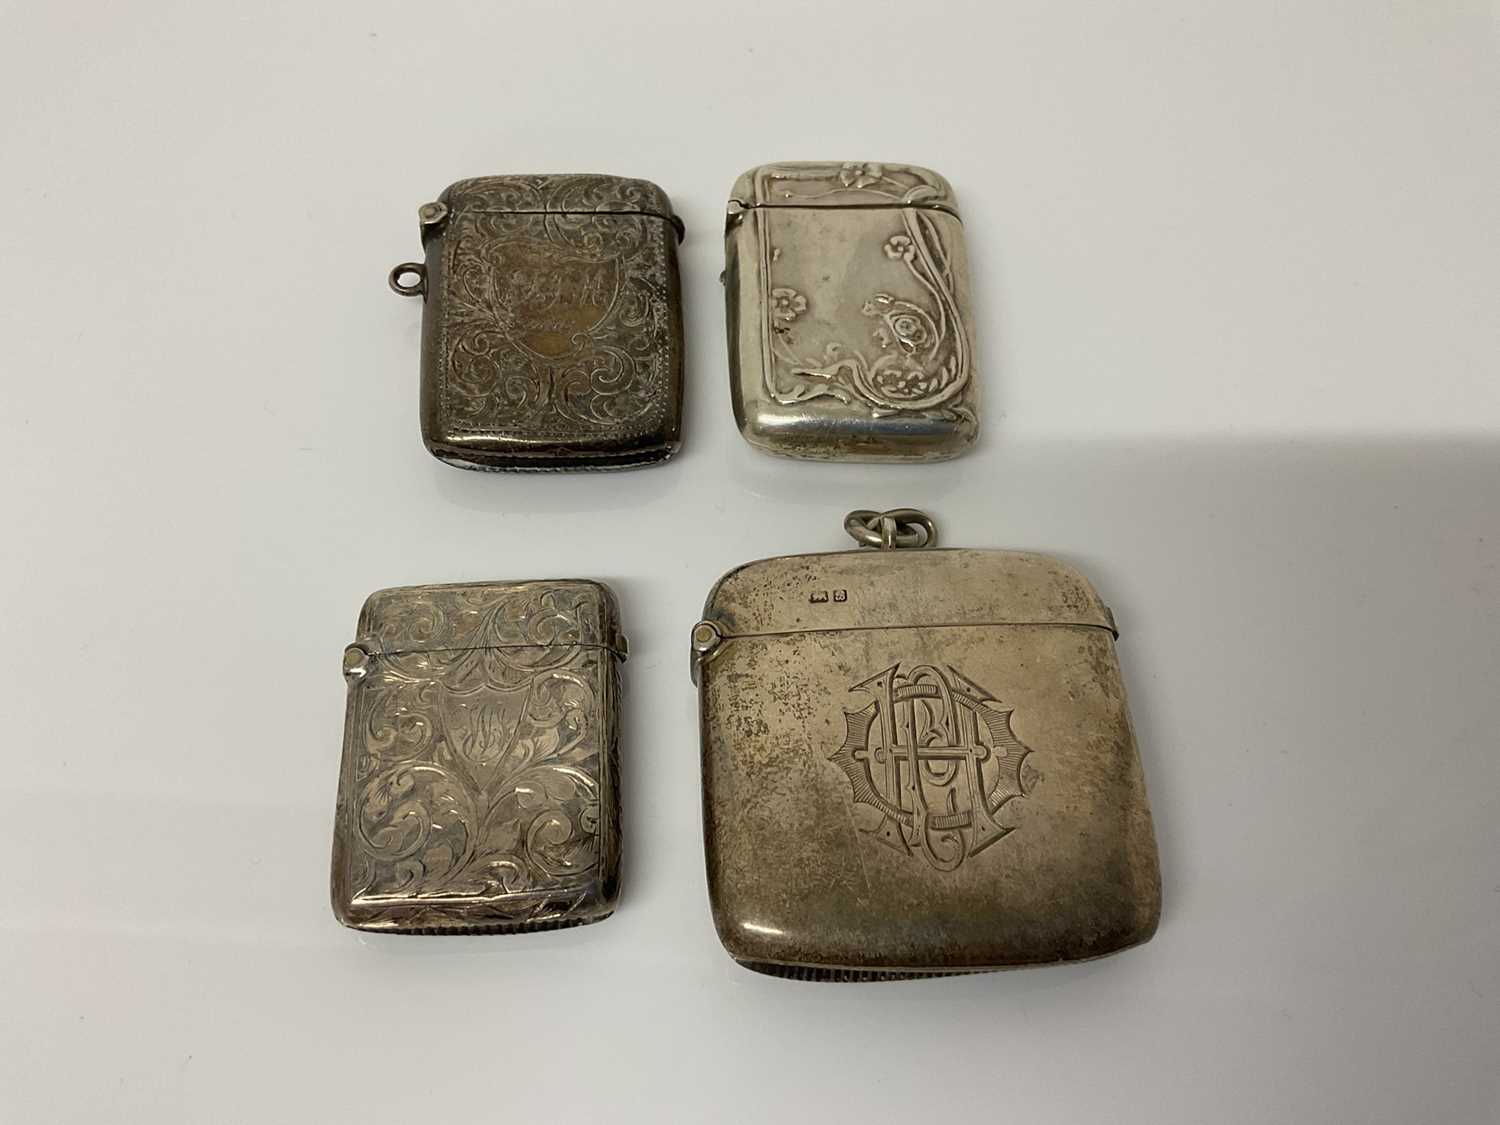 Lot 43 - Victorian silver vesta case with engraved decoration, (Birmingham 1900), together with three other silver Vesta cases (Birmingham 1904, Chester 1902 and another marked Sterling), all at 3.5ozs (4)